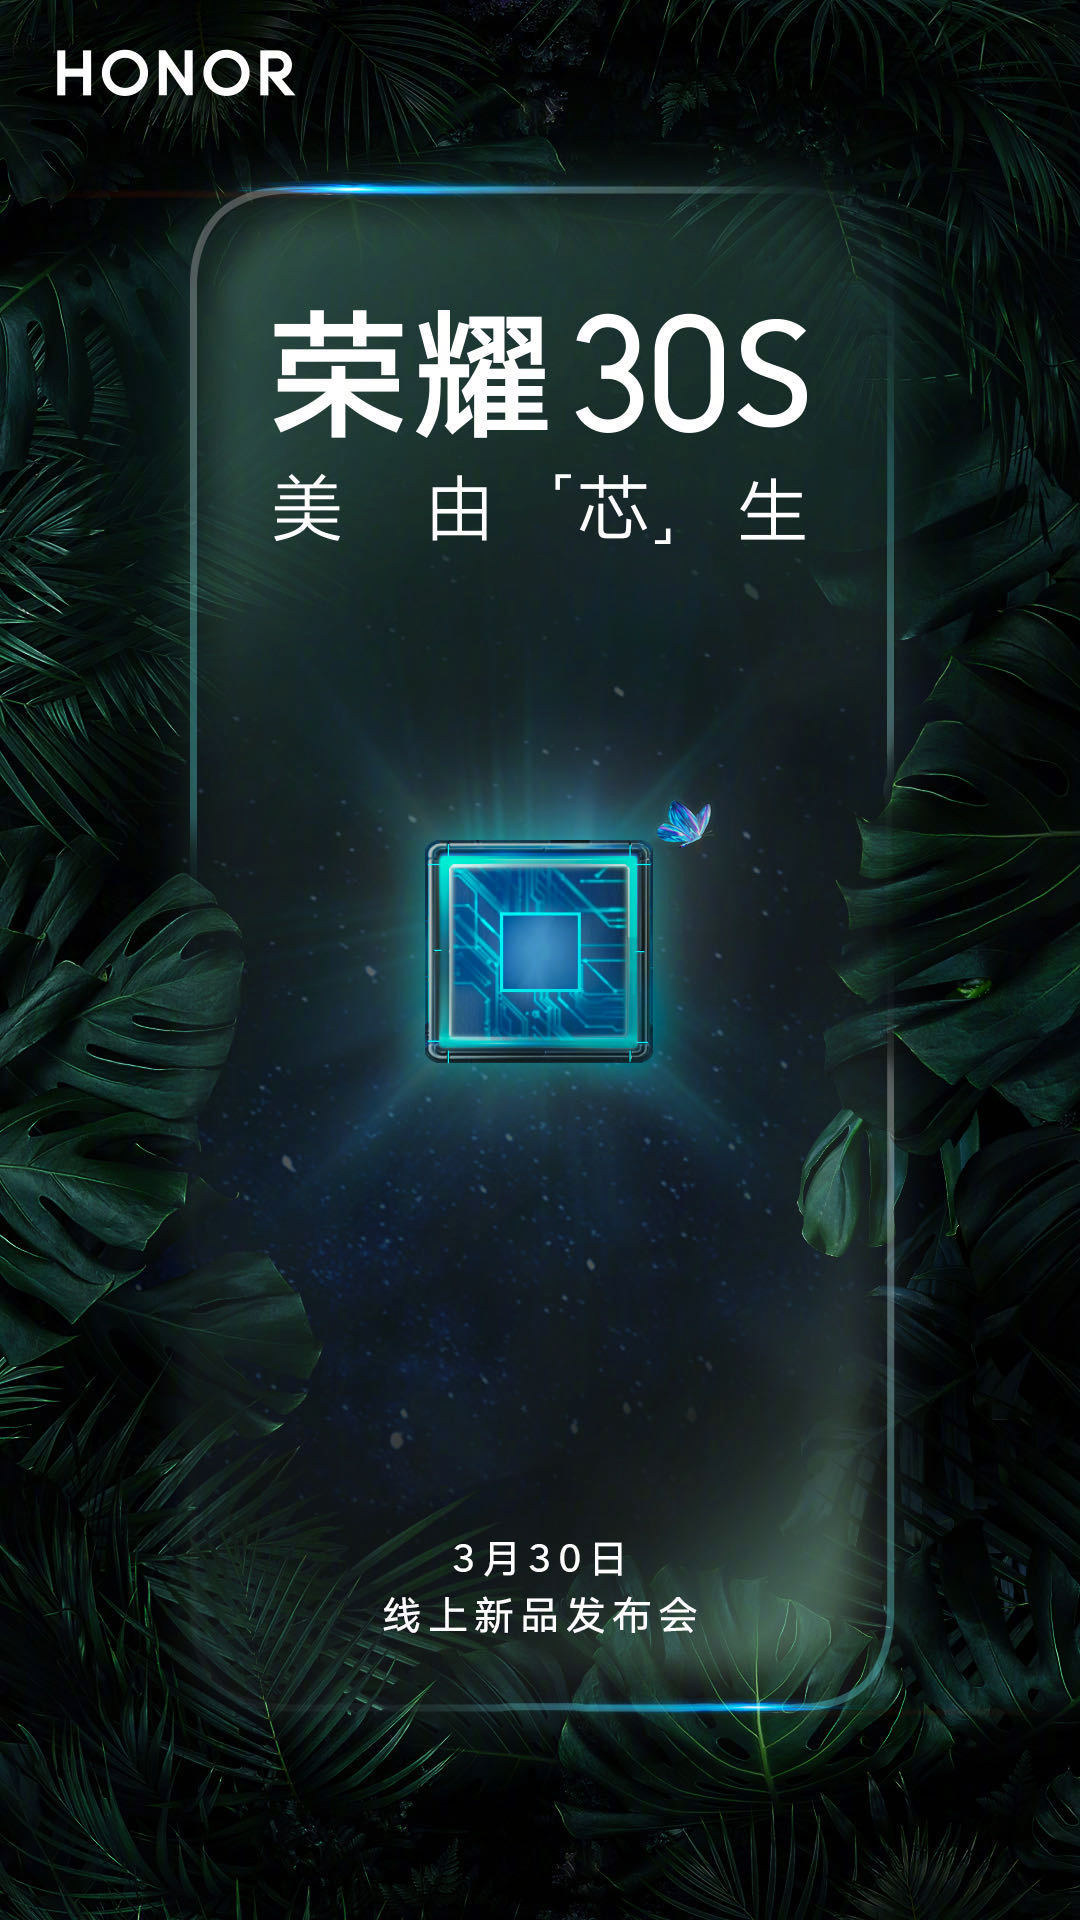 Honor 30S Launch Poster